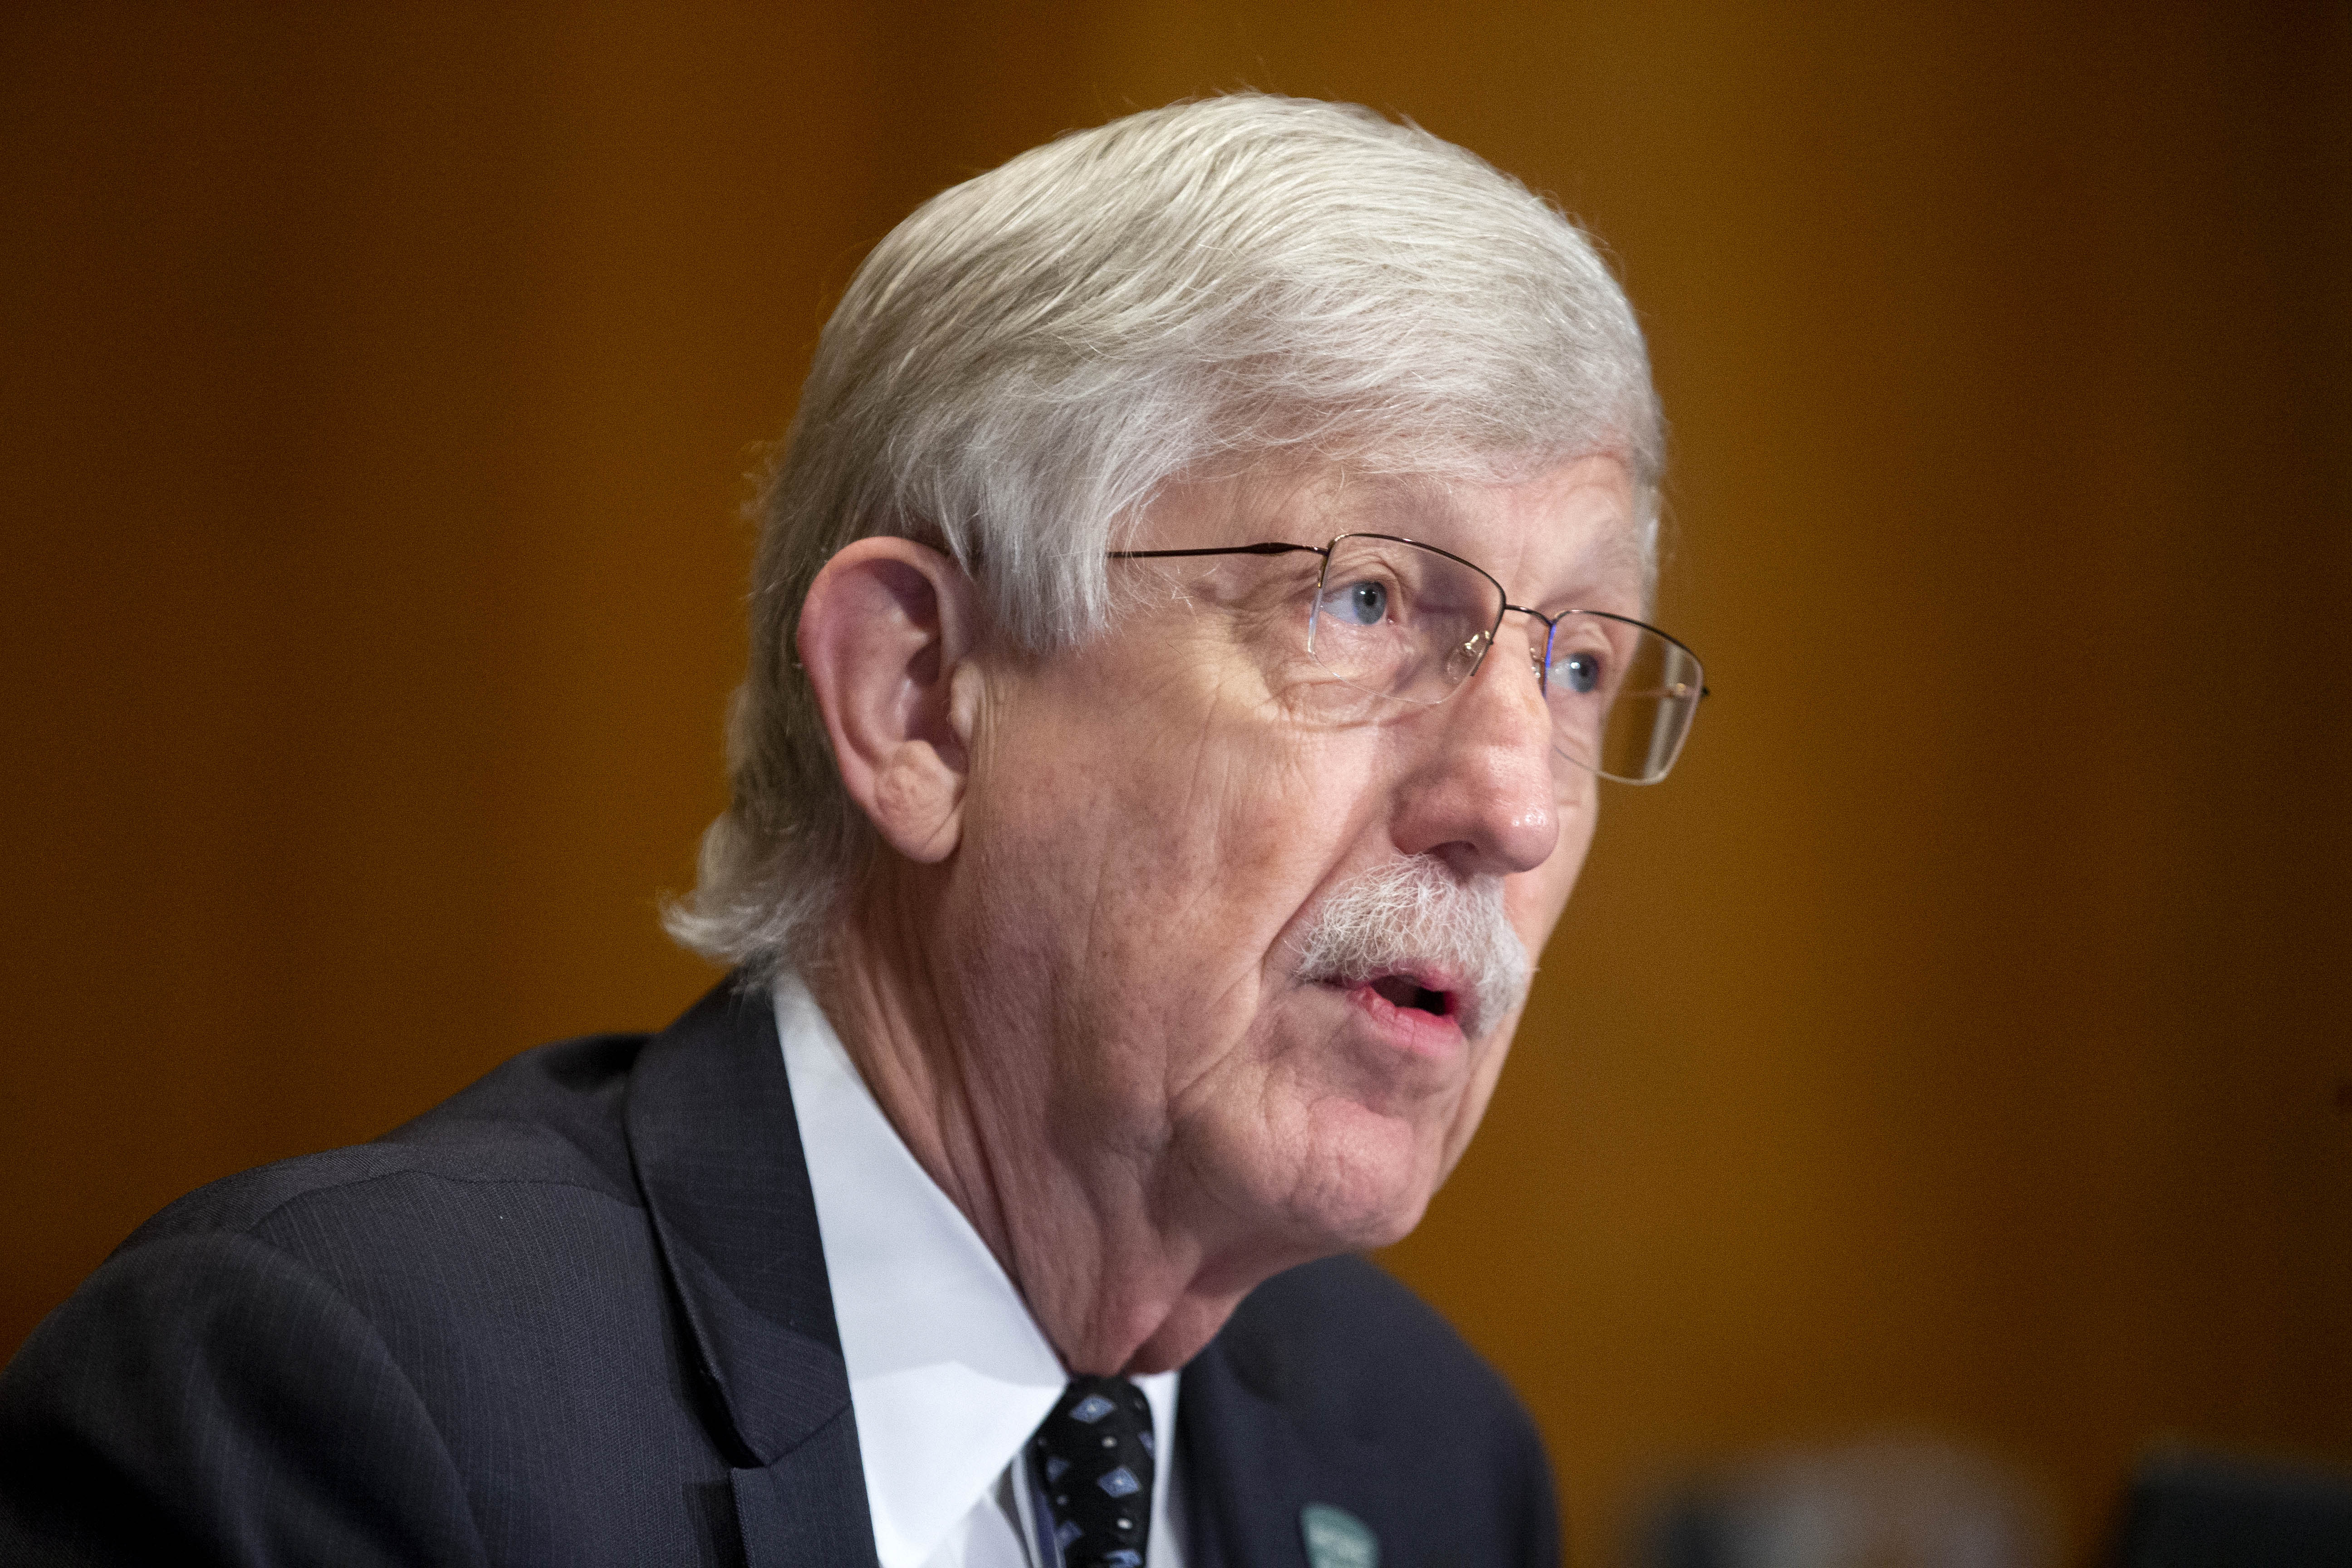 Dr. Francis Collins, director of the National Institutes of Health, attends a hearing in Washington, DC, on September 9.